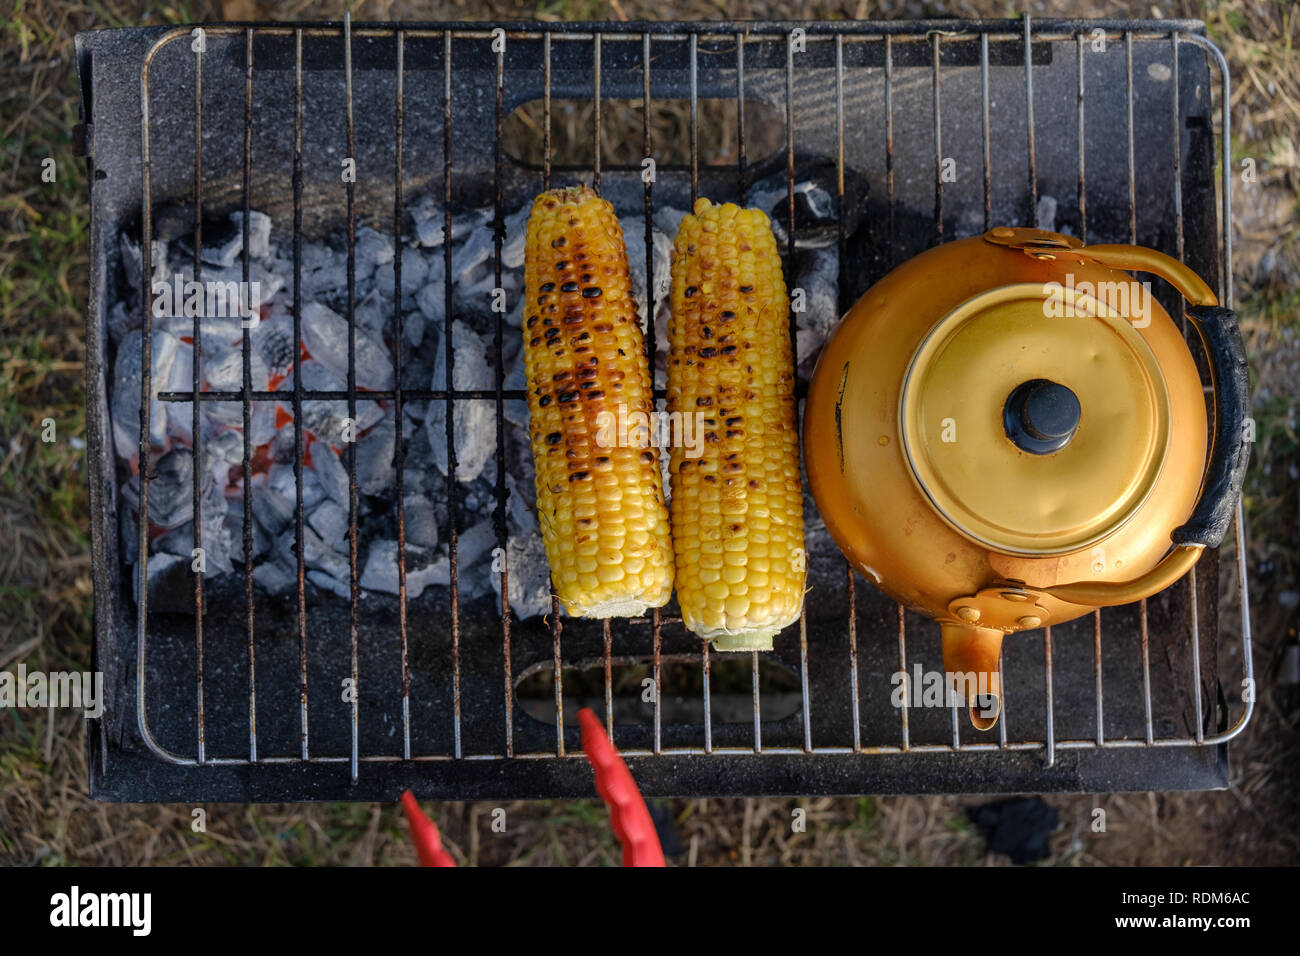 Vinatage Copper Teapot and sweet corn on the Grill Stock Photo